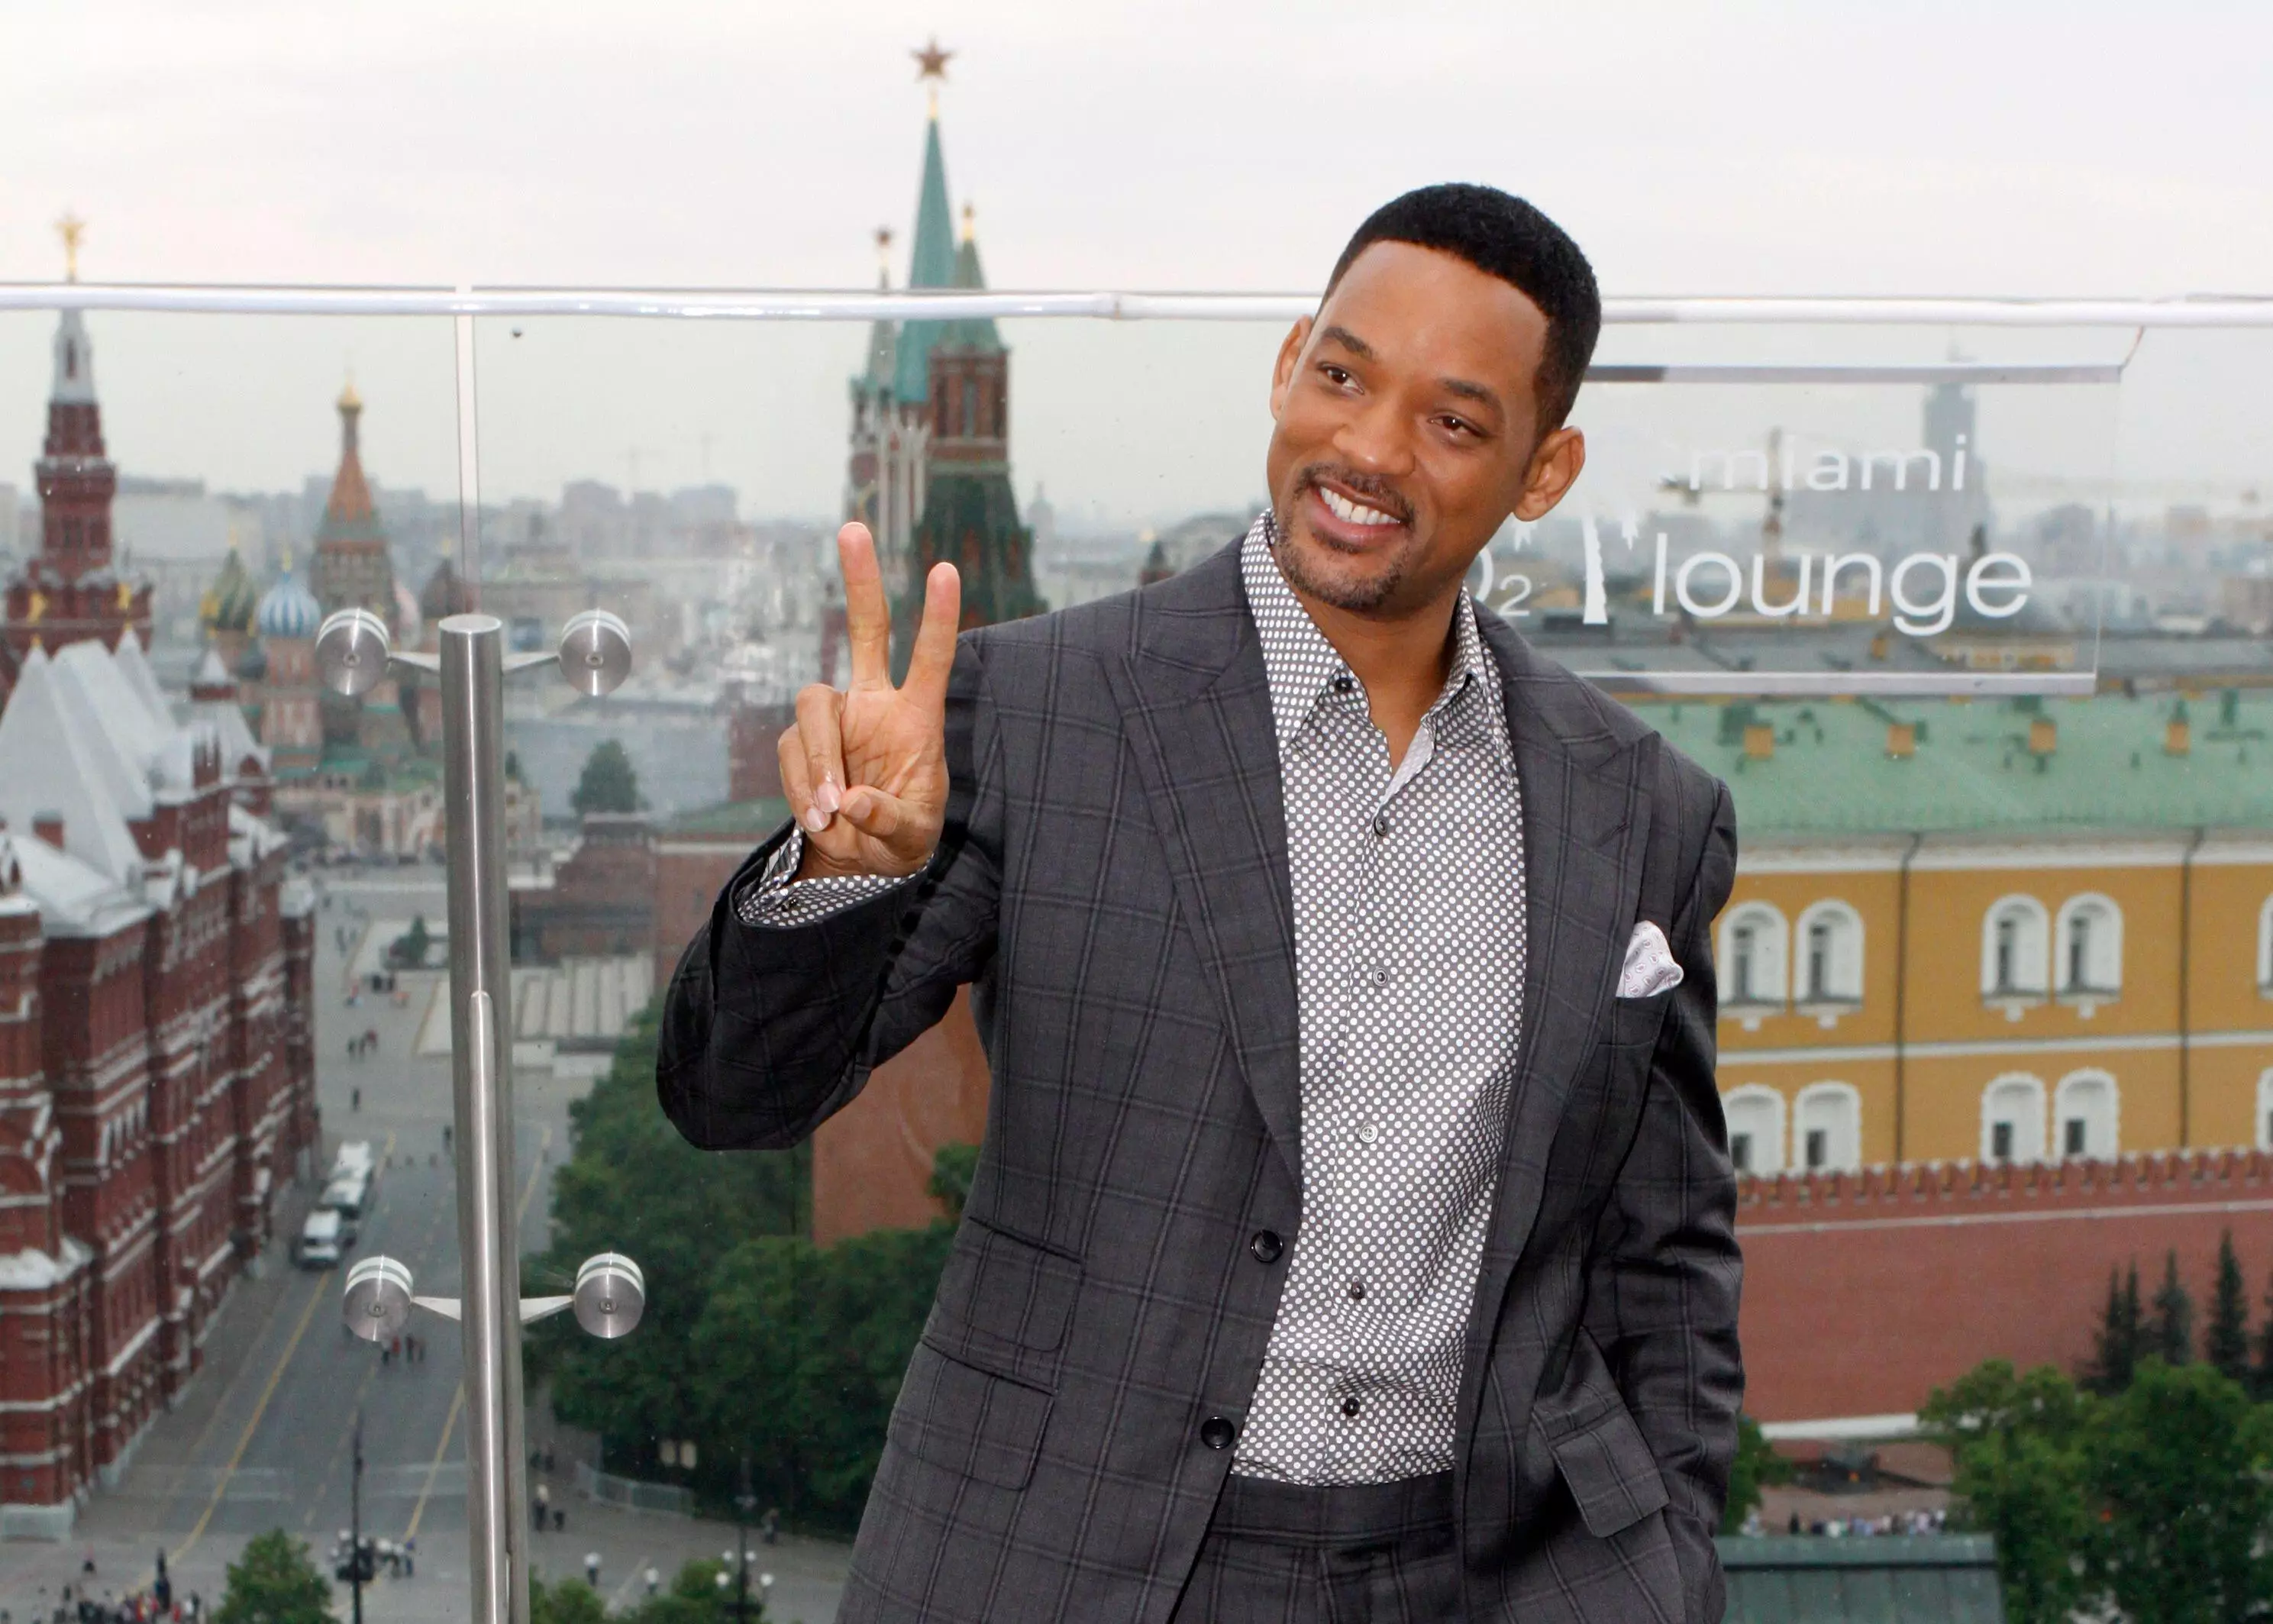 Smith at a photocall in Moscow before the event.